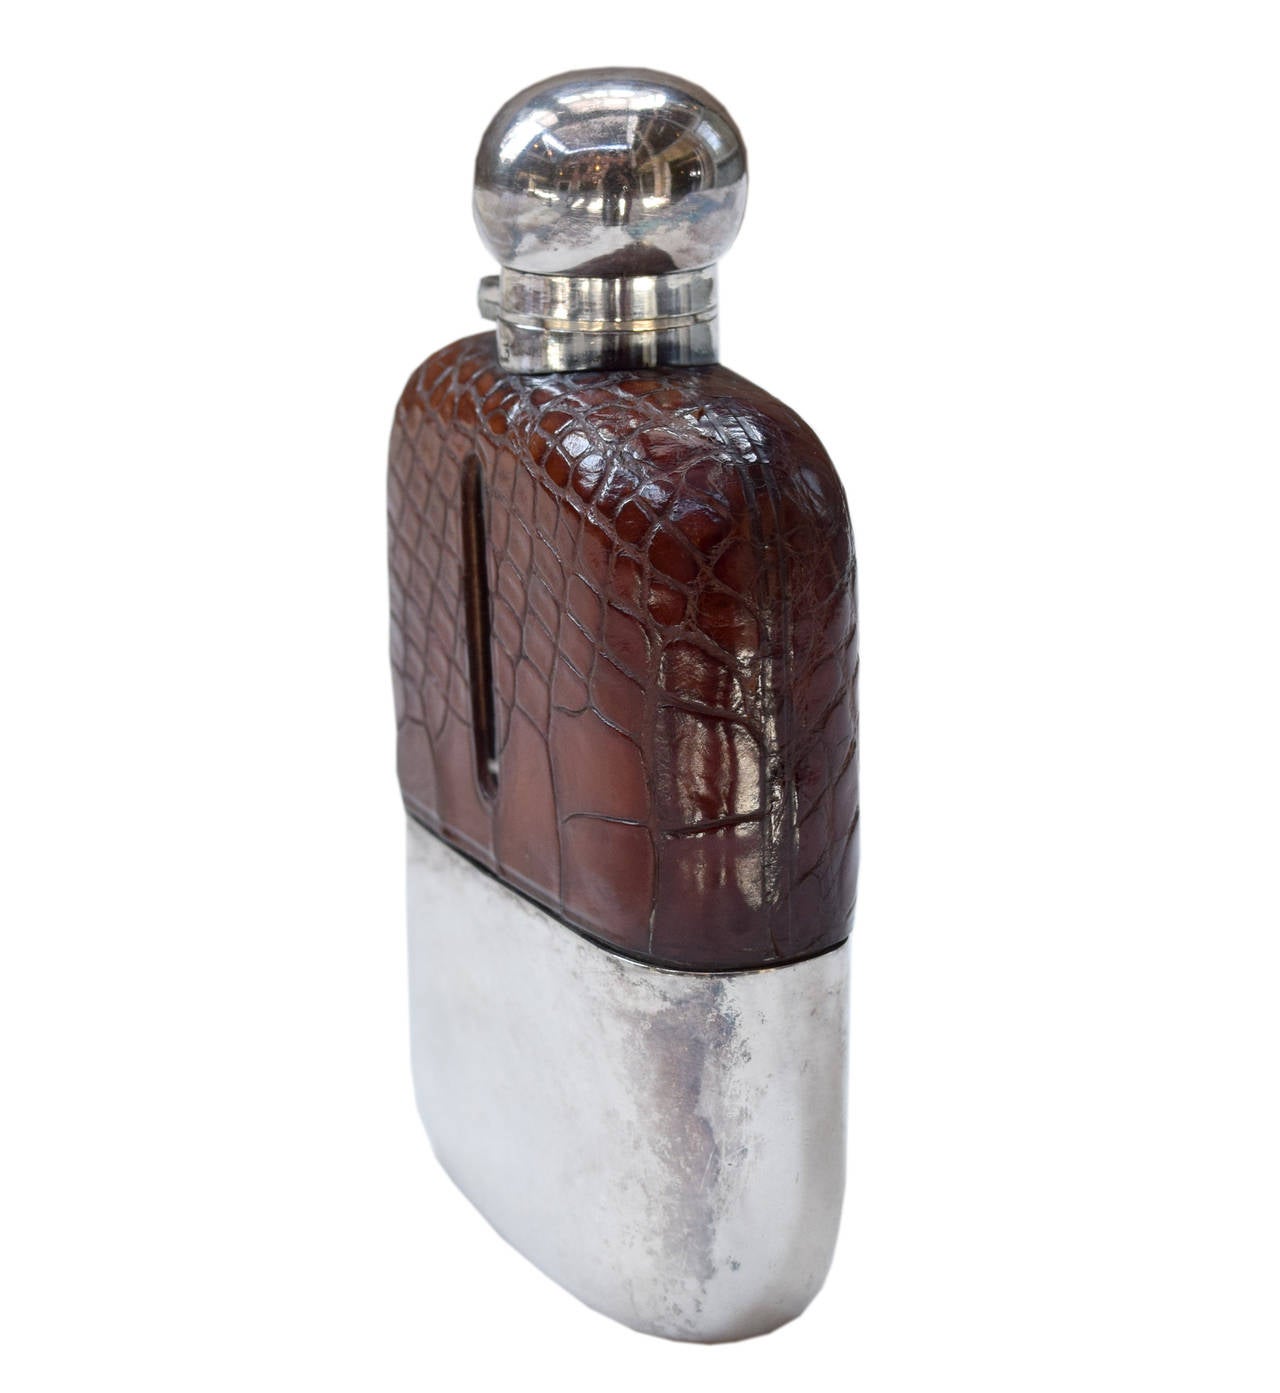 An early 20th century alligator and silver plate flask by James Dixon and Sons, London. The flask features a removable gold lined cup and a bayonet style cap. Engraved on the front with a W, I and S.